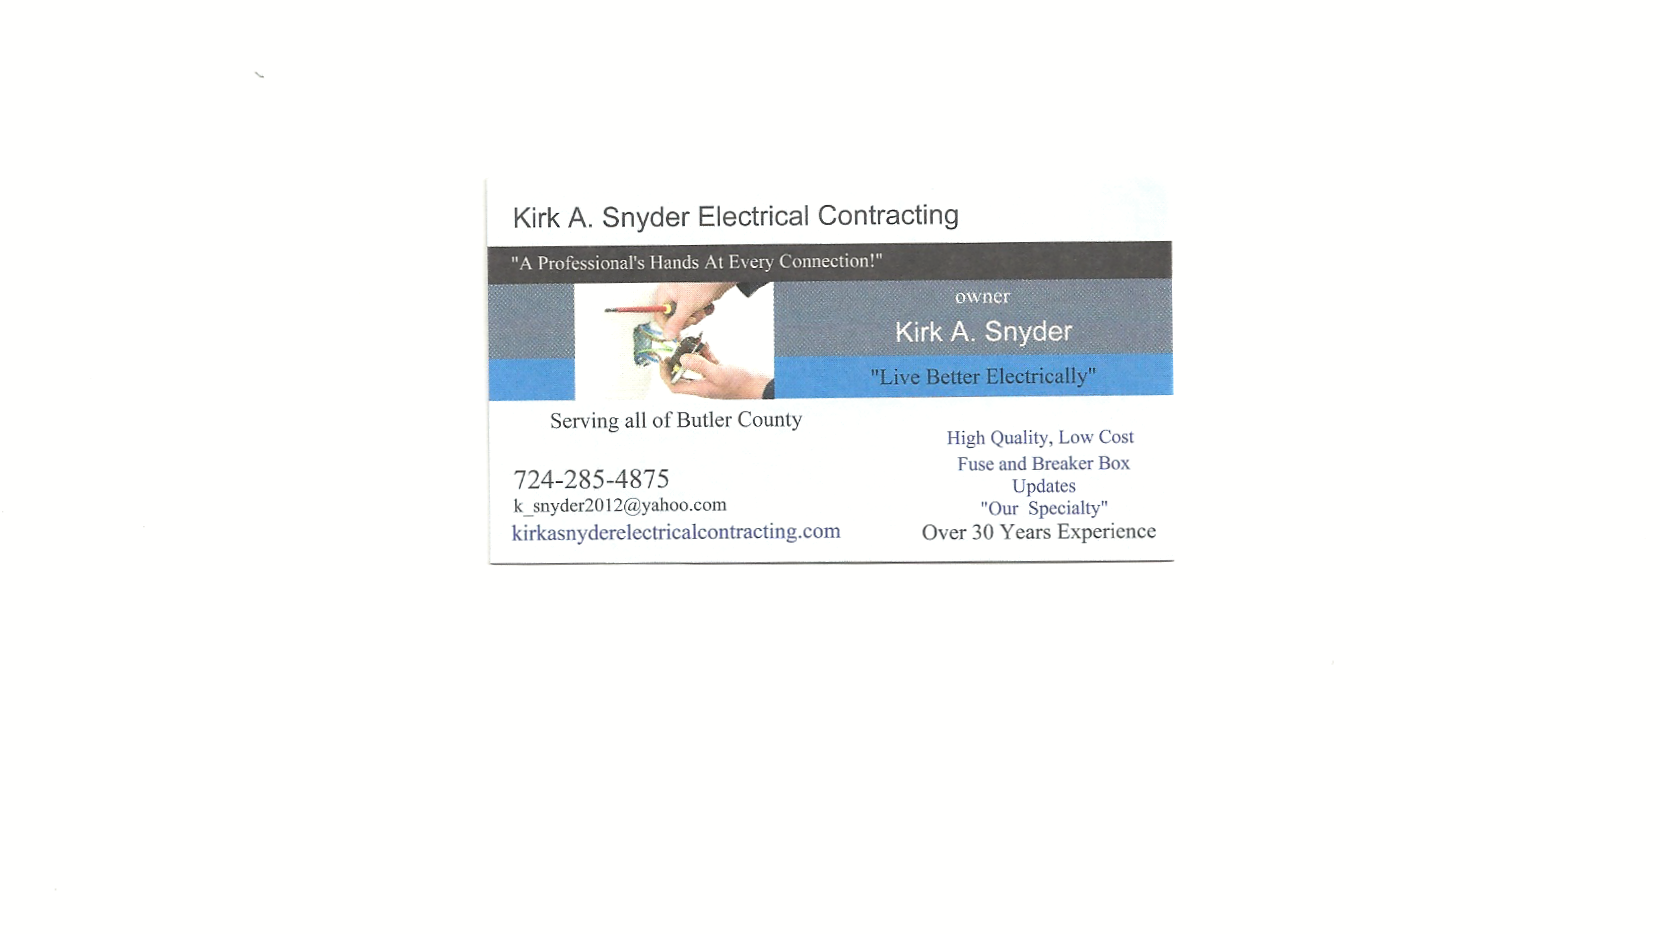 Kirk A Snyder Electrical Contracting